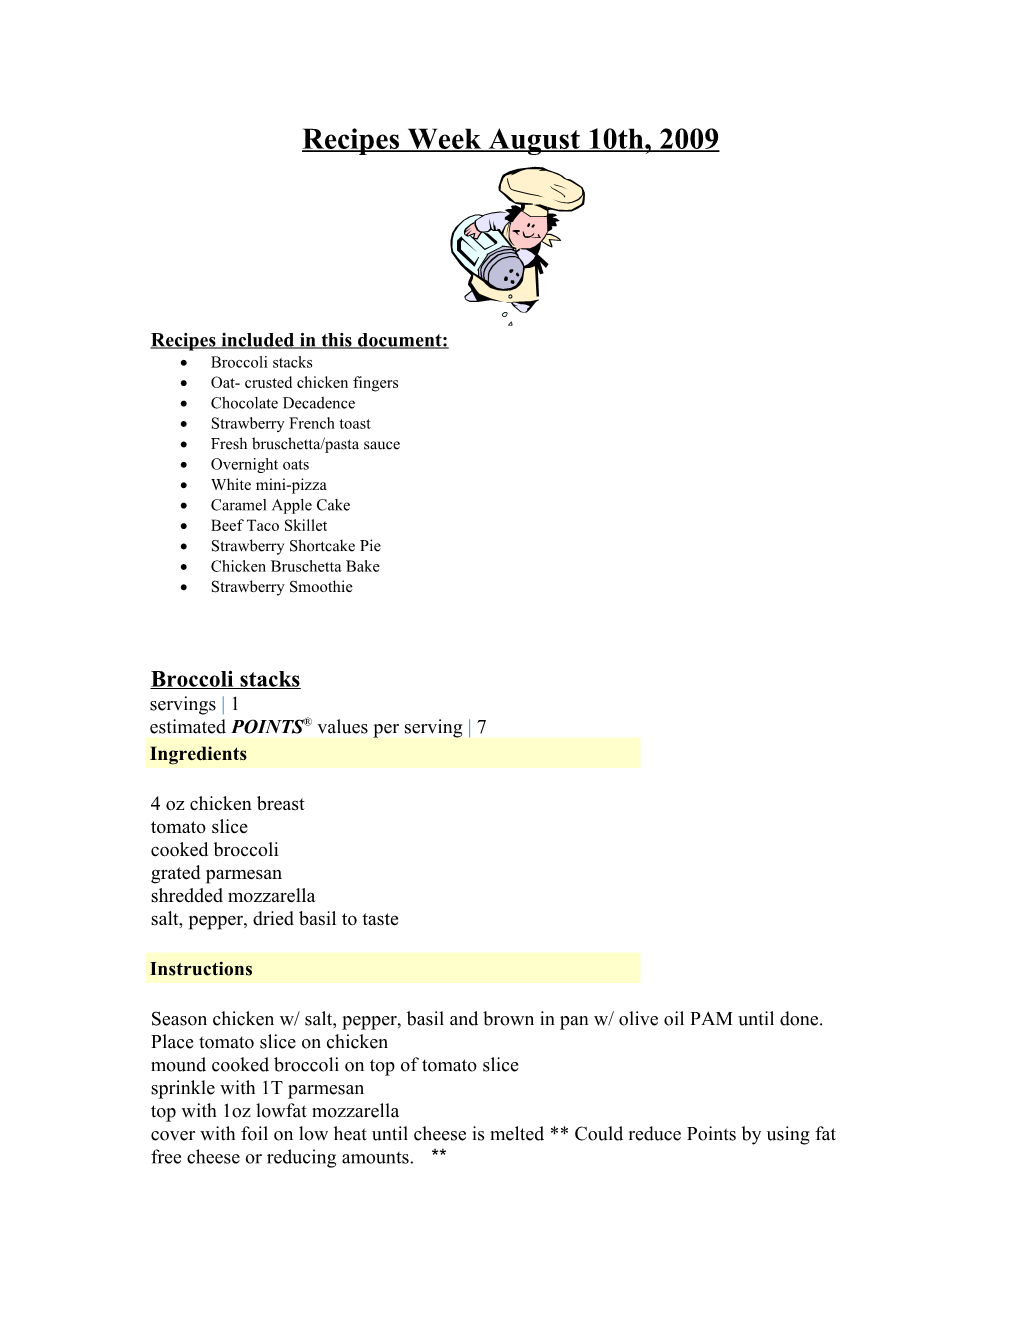 Recipes Included in This Document